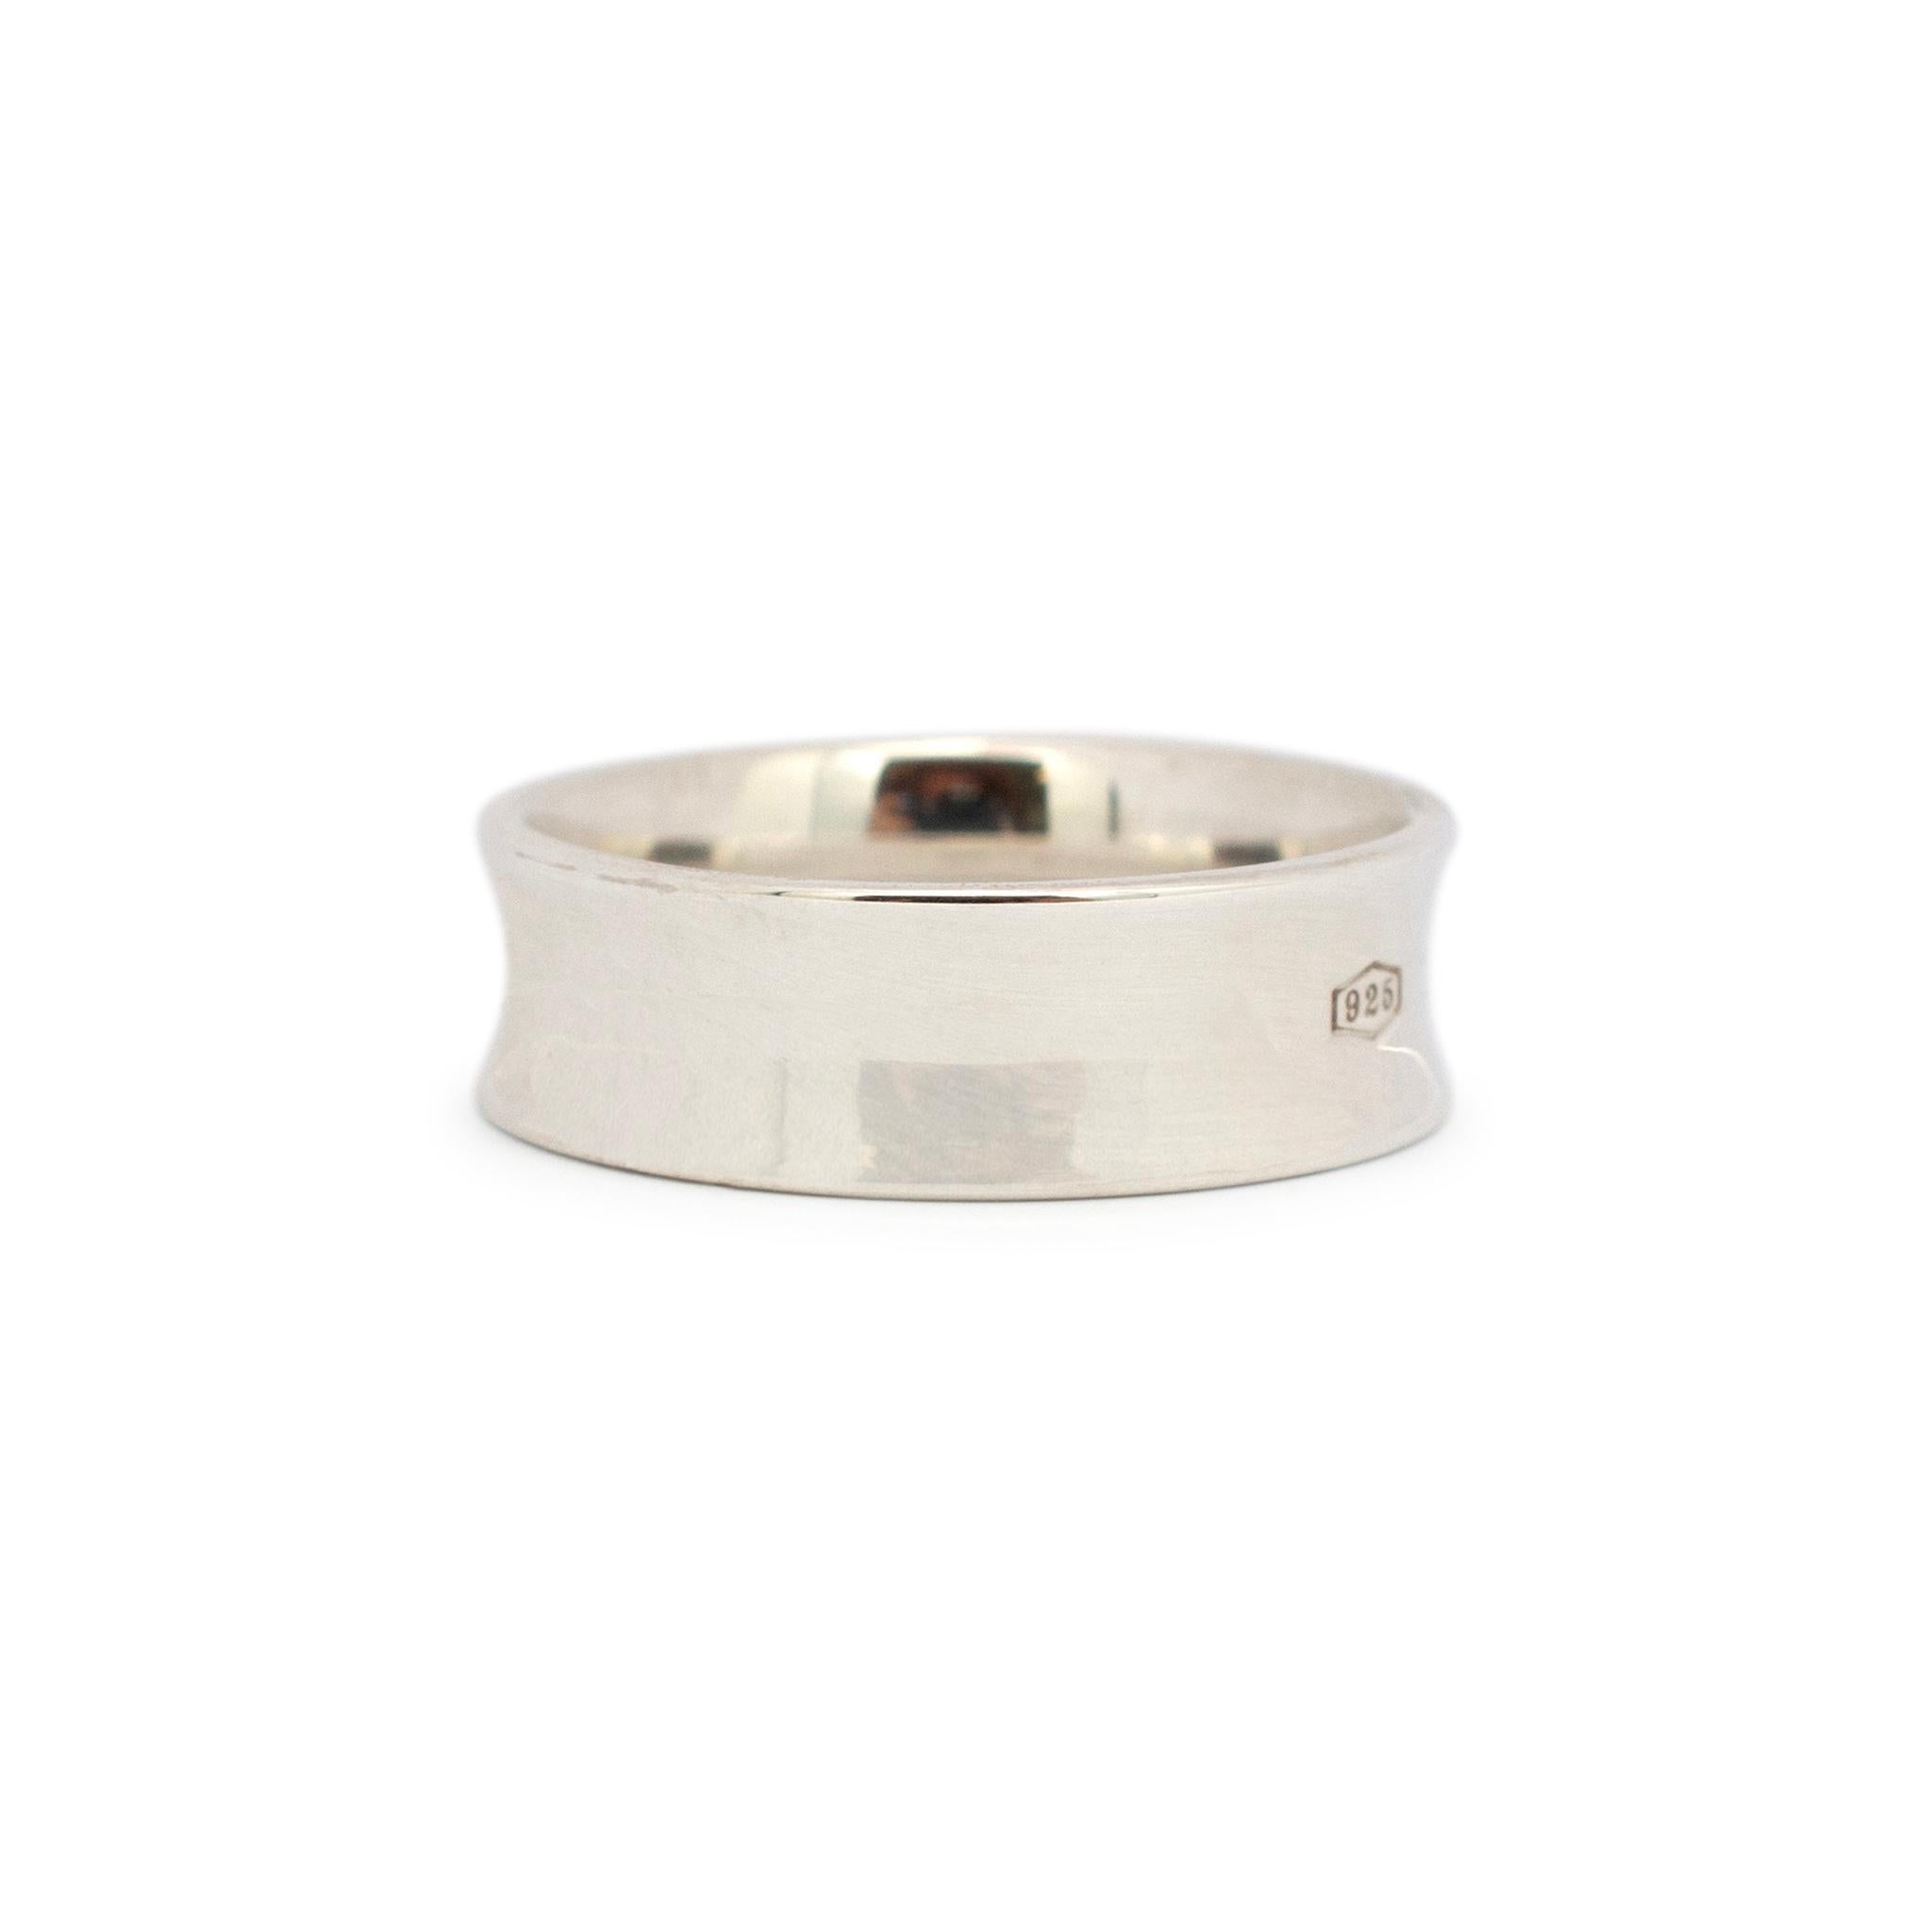 Gender: Ladies

Metal Type: Sterling Silver

Size: 8.5

Shank Maximum Width: 22.00 mm tapering to 7.00 mm

Weight: 8.50 grams

One ladies silver ring. The 